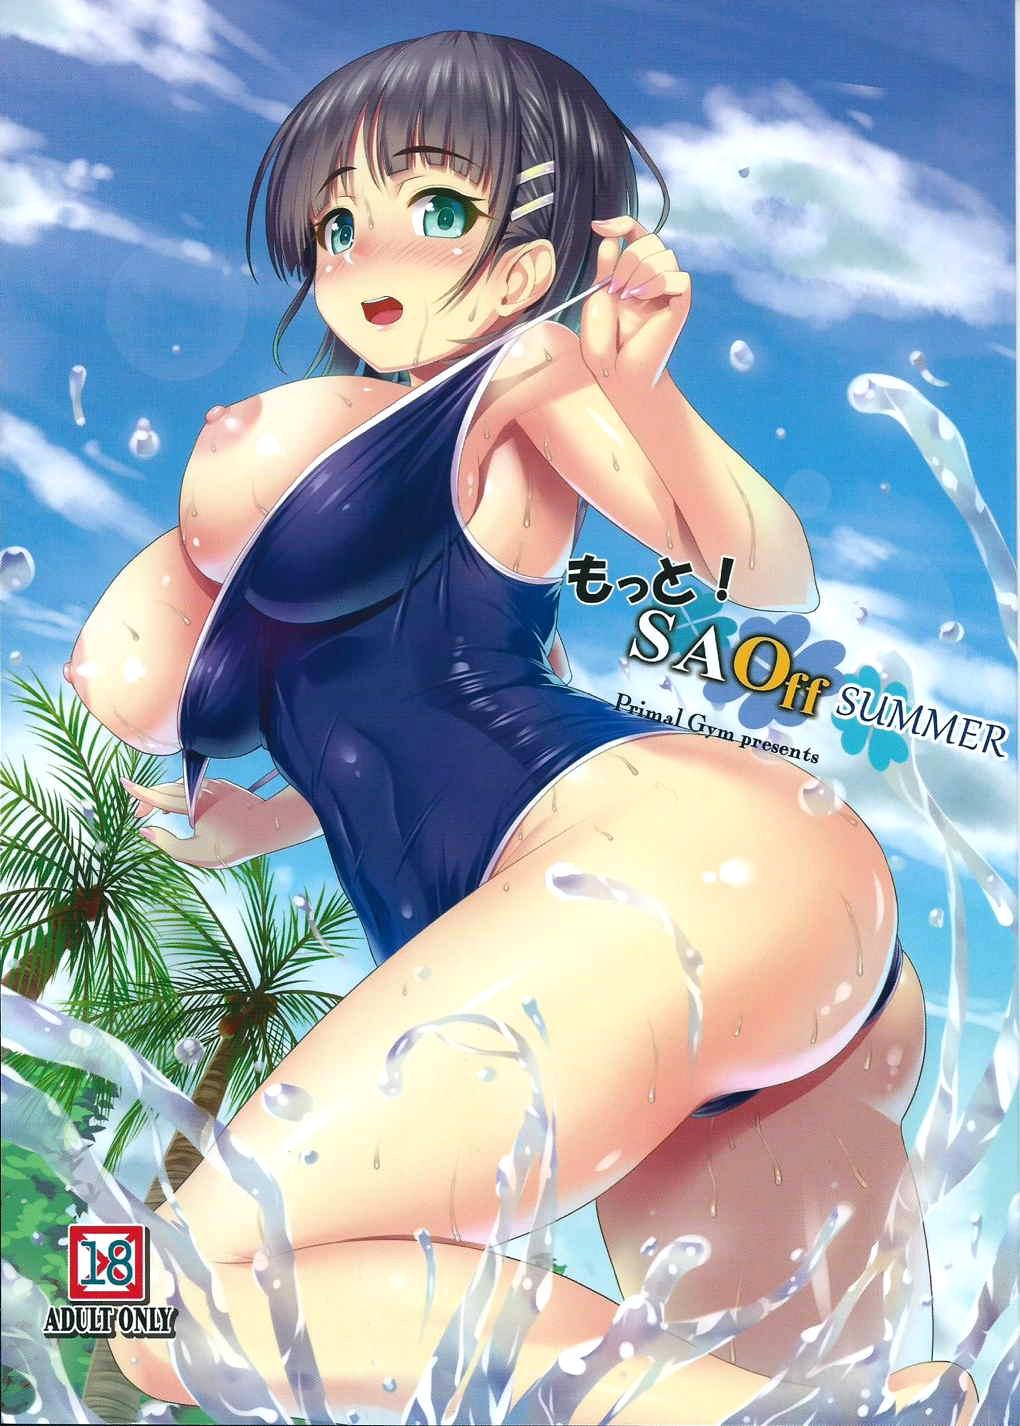 Shaved Motto! SAOff SUMMER - Sword art online Sexy - Picture 1